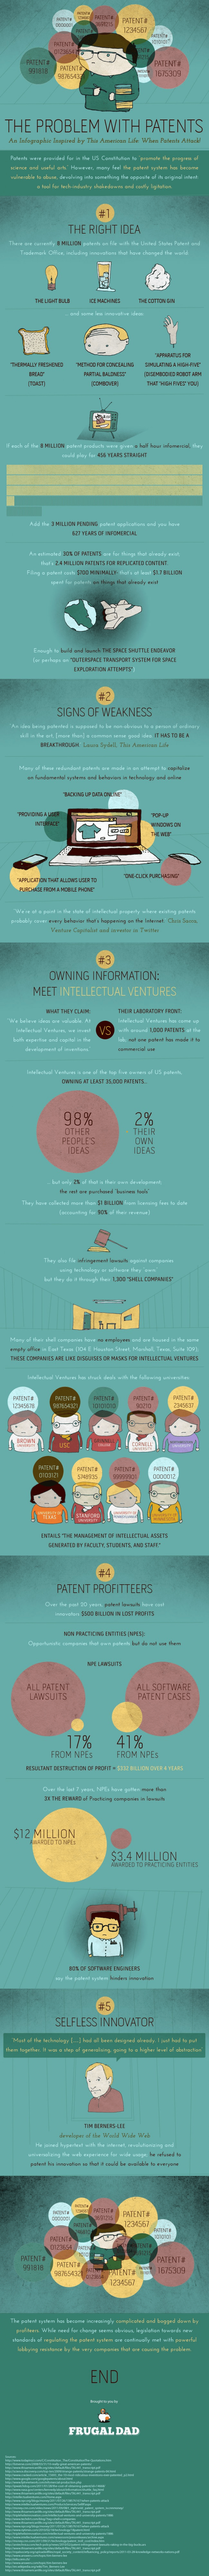 the problem with patents infographic